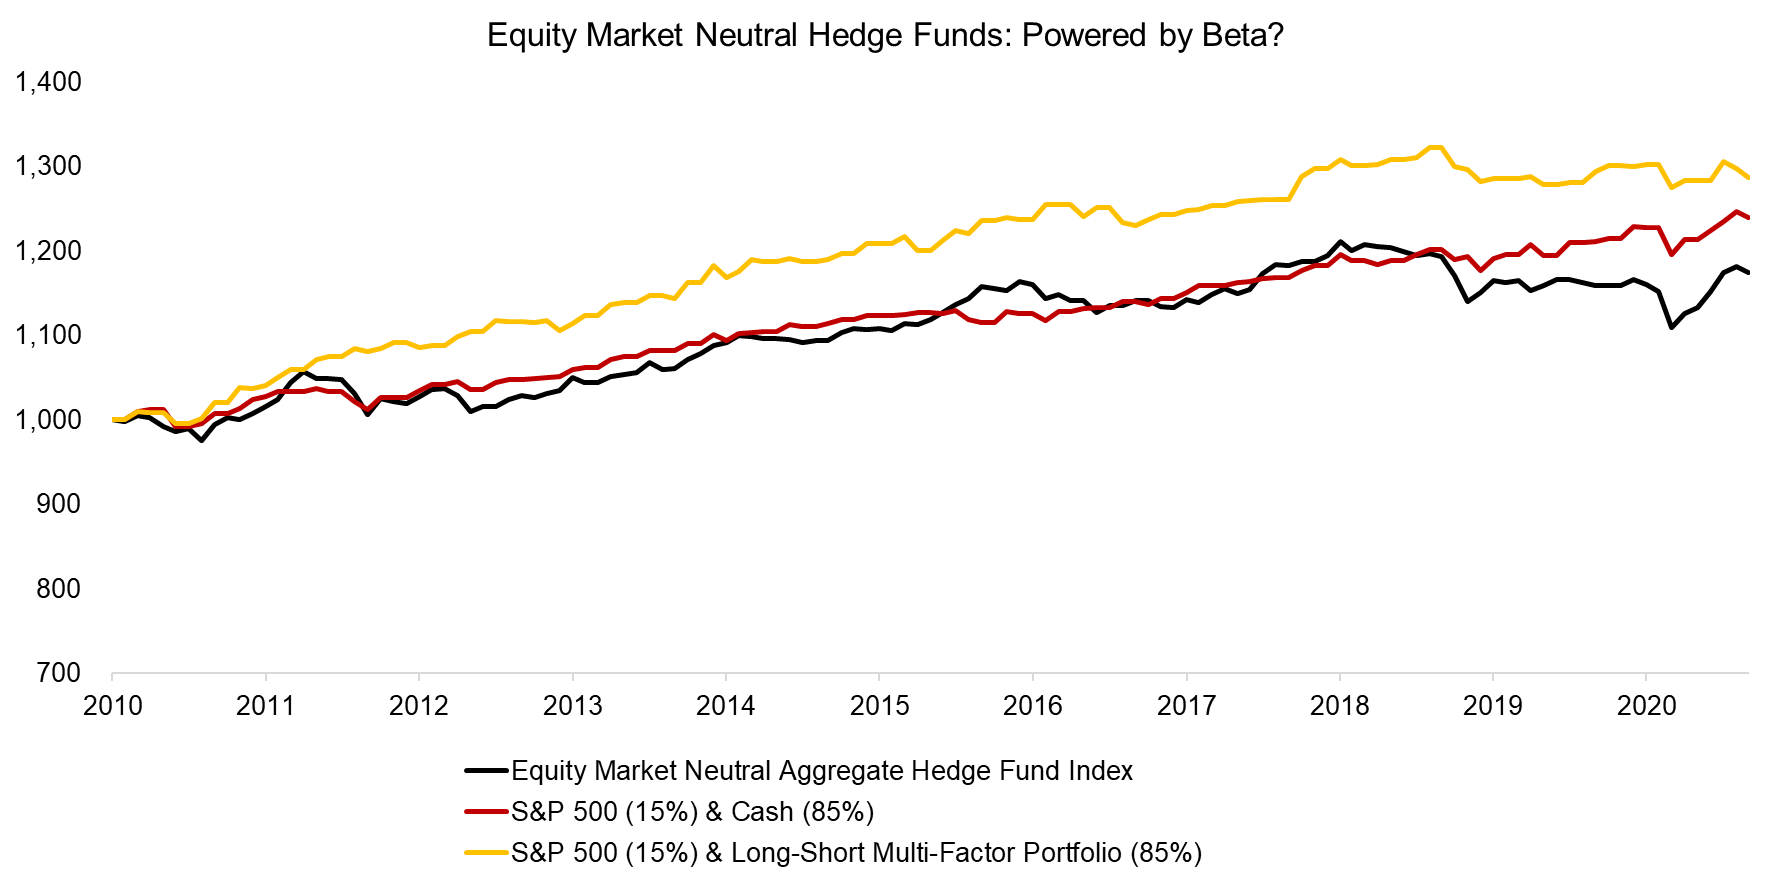 Equity Market Neutral Hedge Funds Powered by Beta